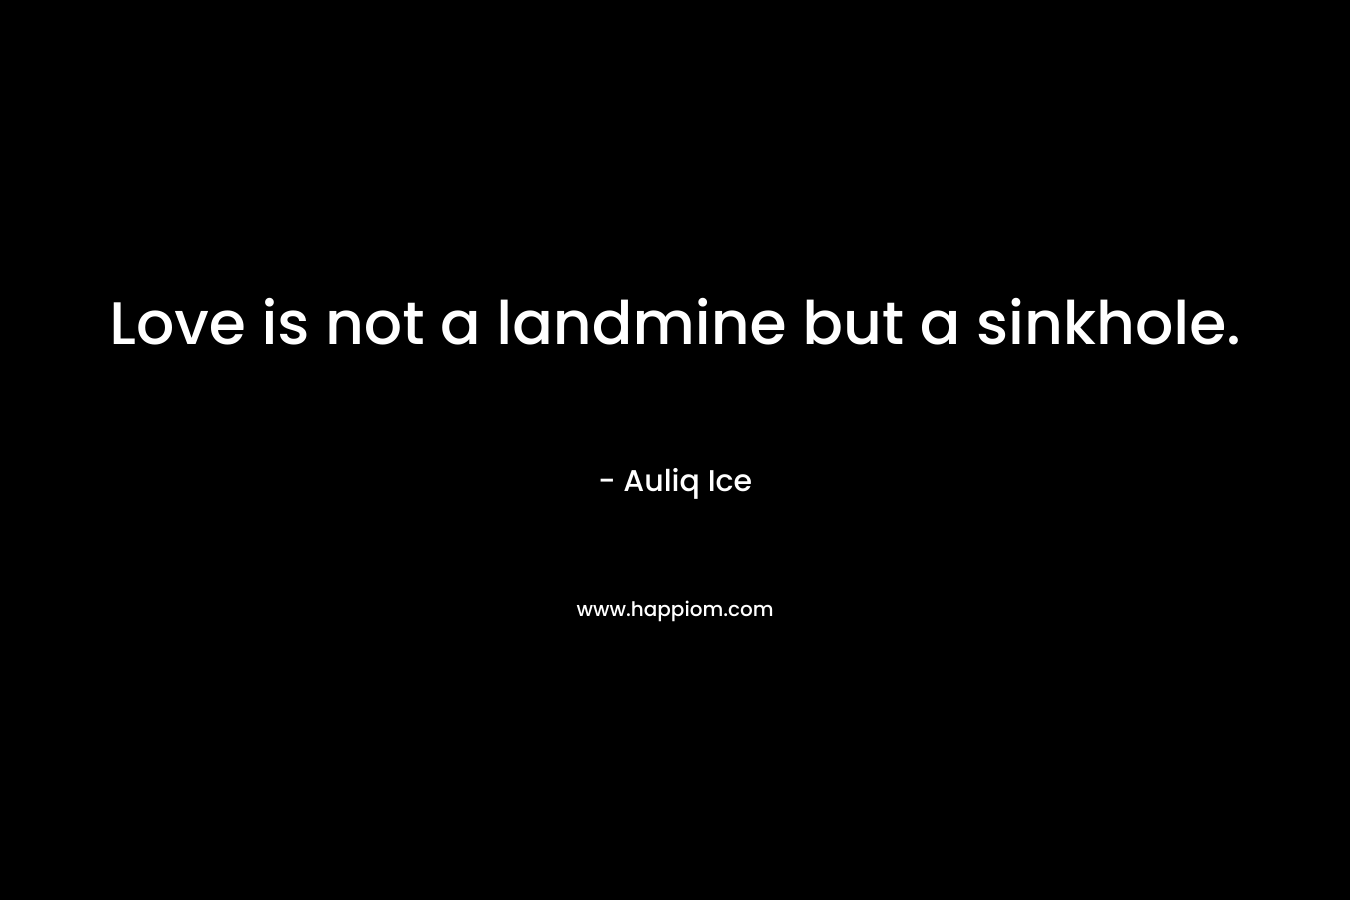 Love is not a landmine but a sinkhole. – Auliq Ice